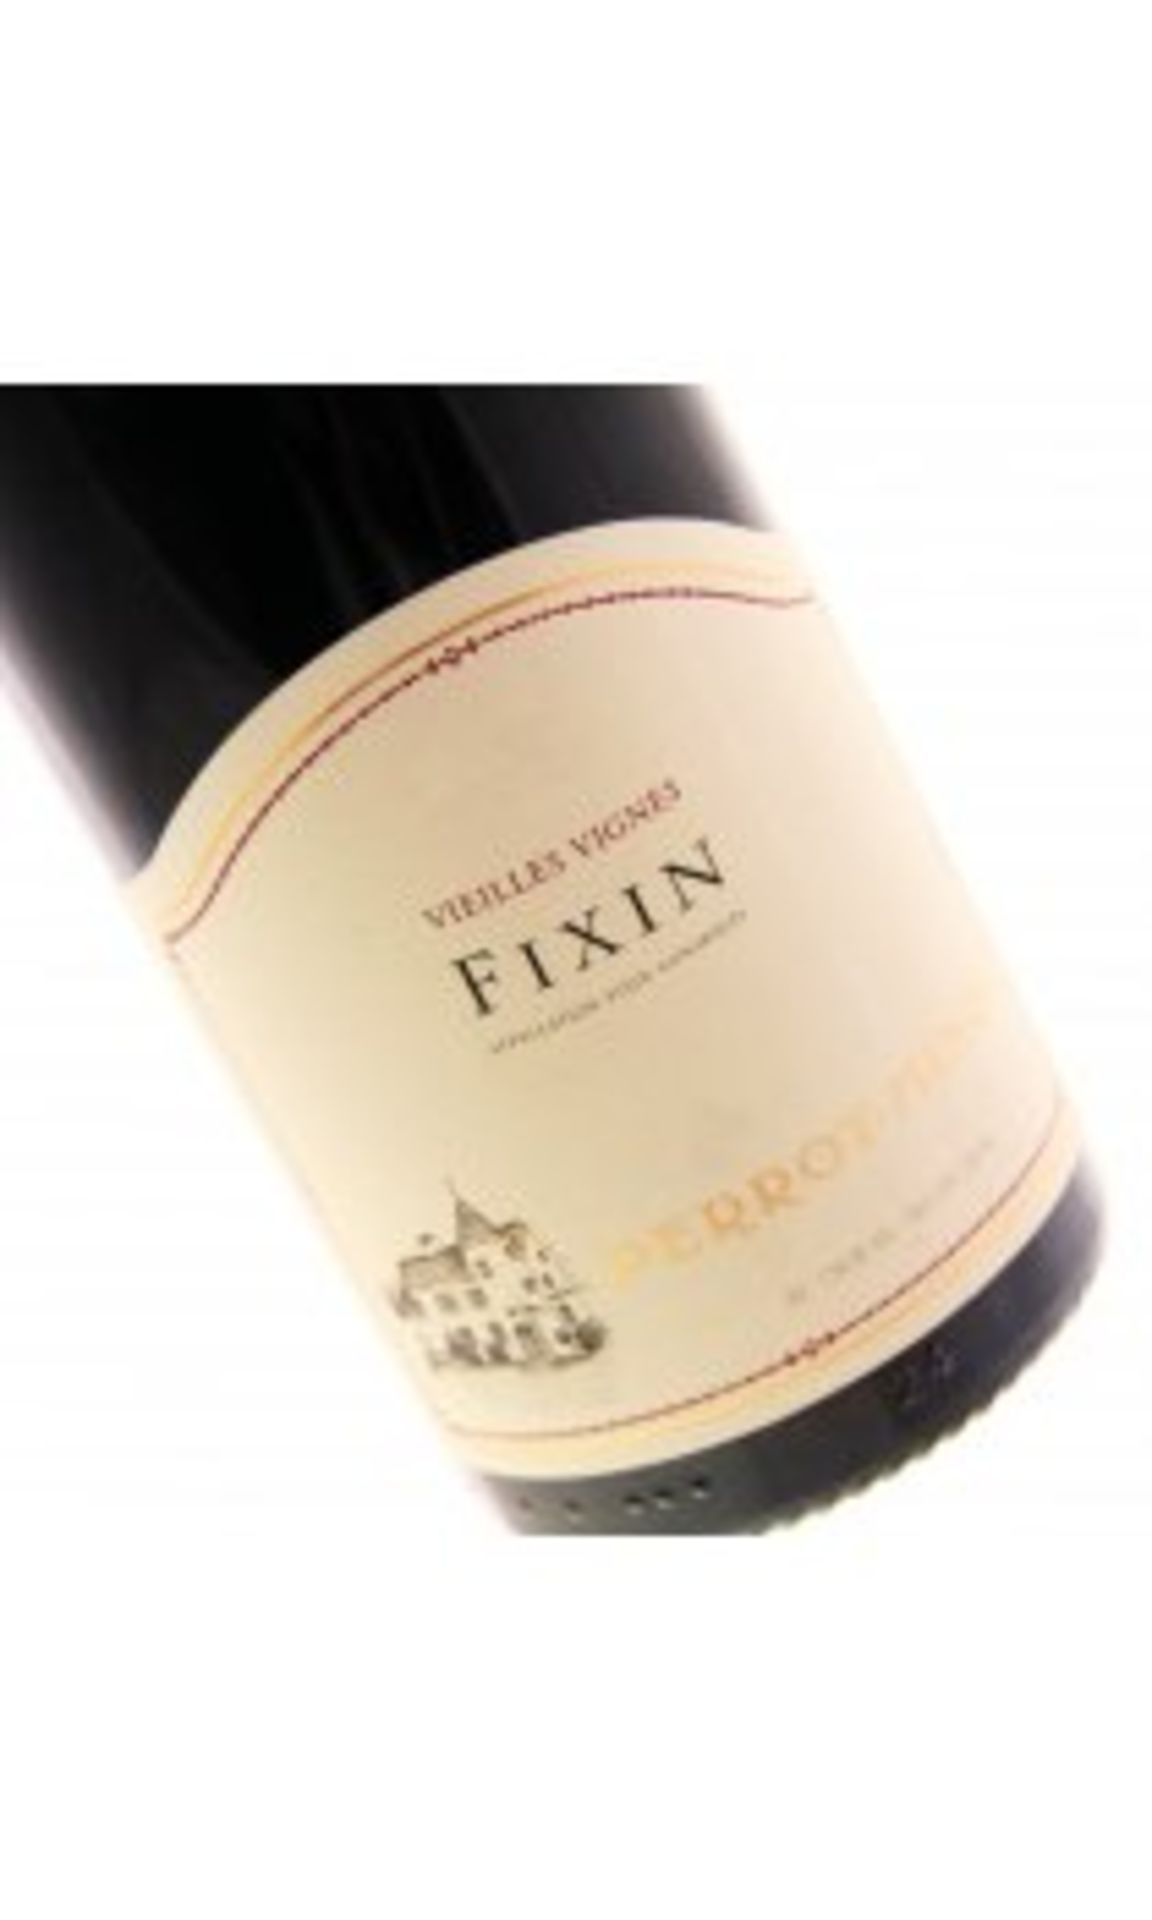 Domaine Perrot Minot Fixin Vieilles Vignes, France 2011 750ml ( Bid Is For 1x Bottle Option To